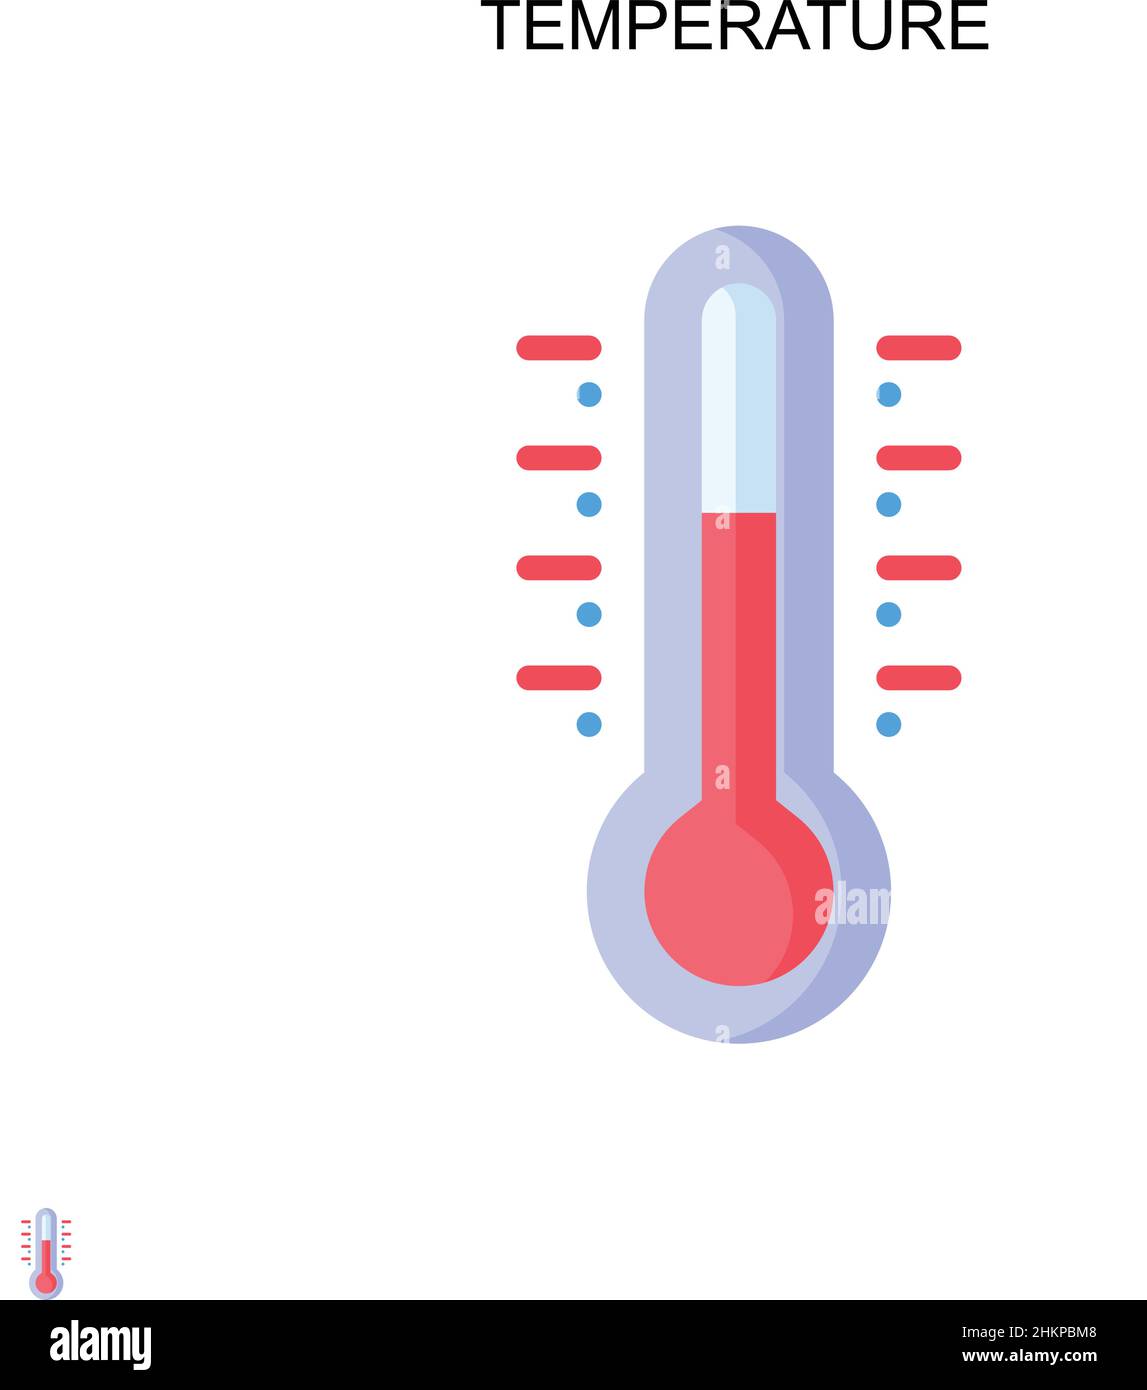 Premium Vector  Cold warm thermometer with celsius and fahrenheit scale  temp control thermostat device flat vector icon thermometers measuring  temperature icons meteorology equipment showing weather